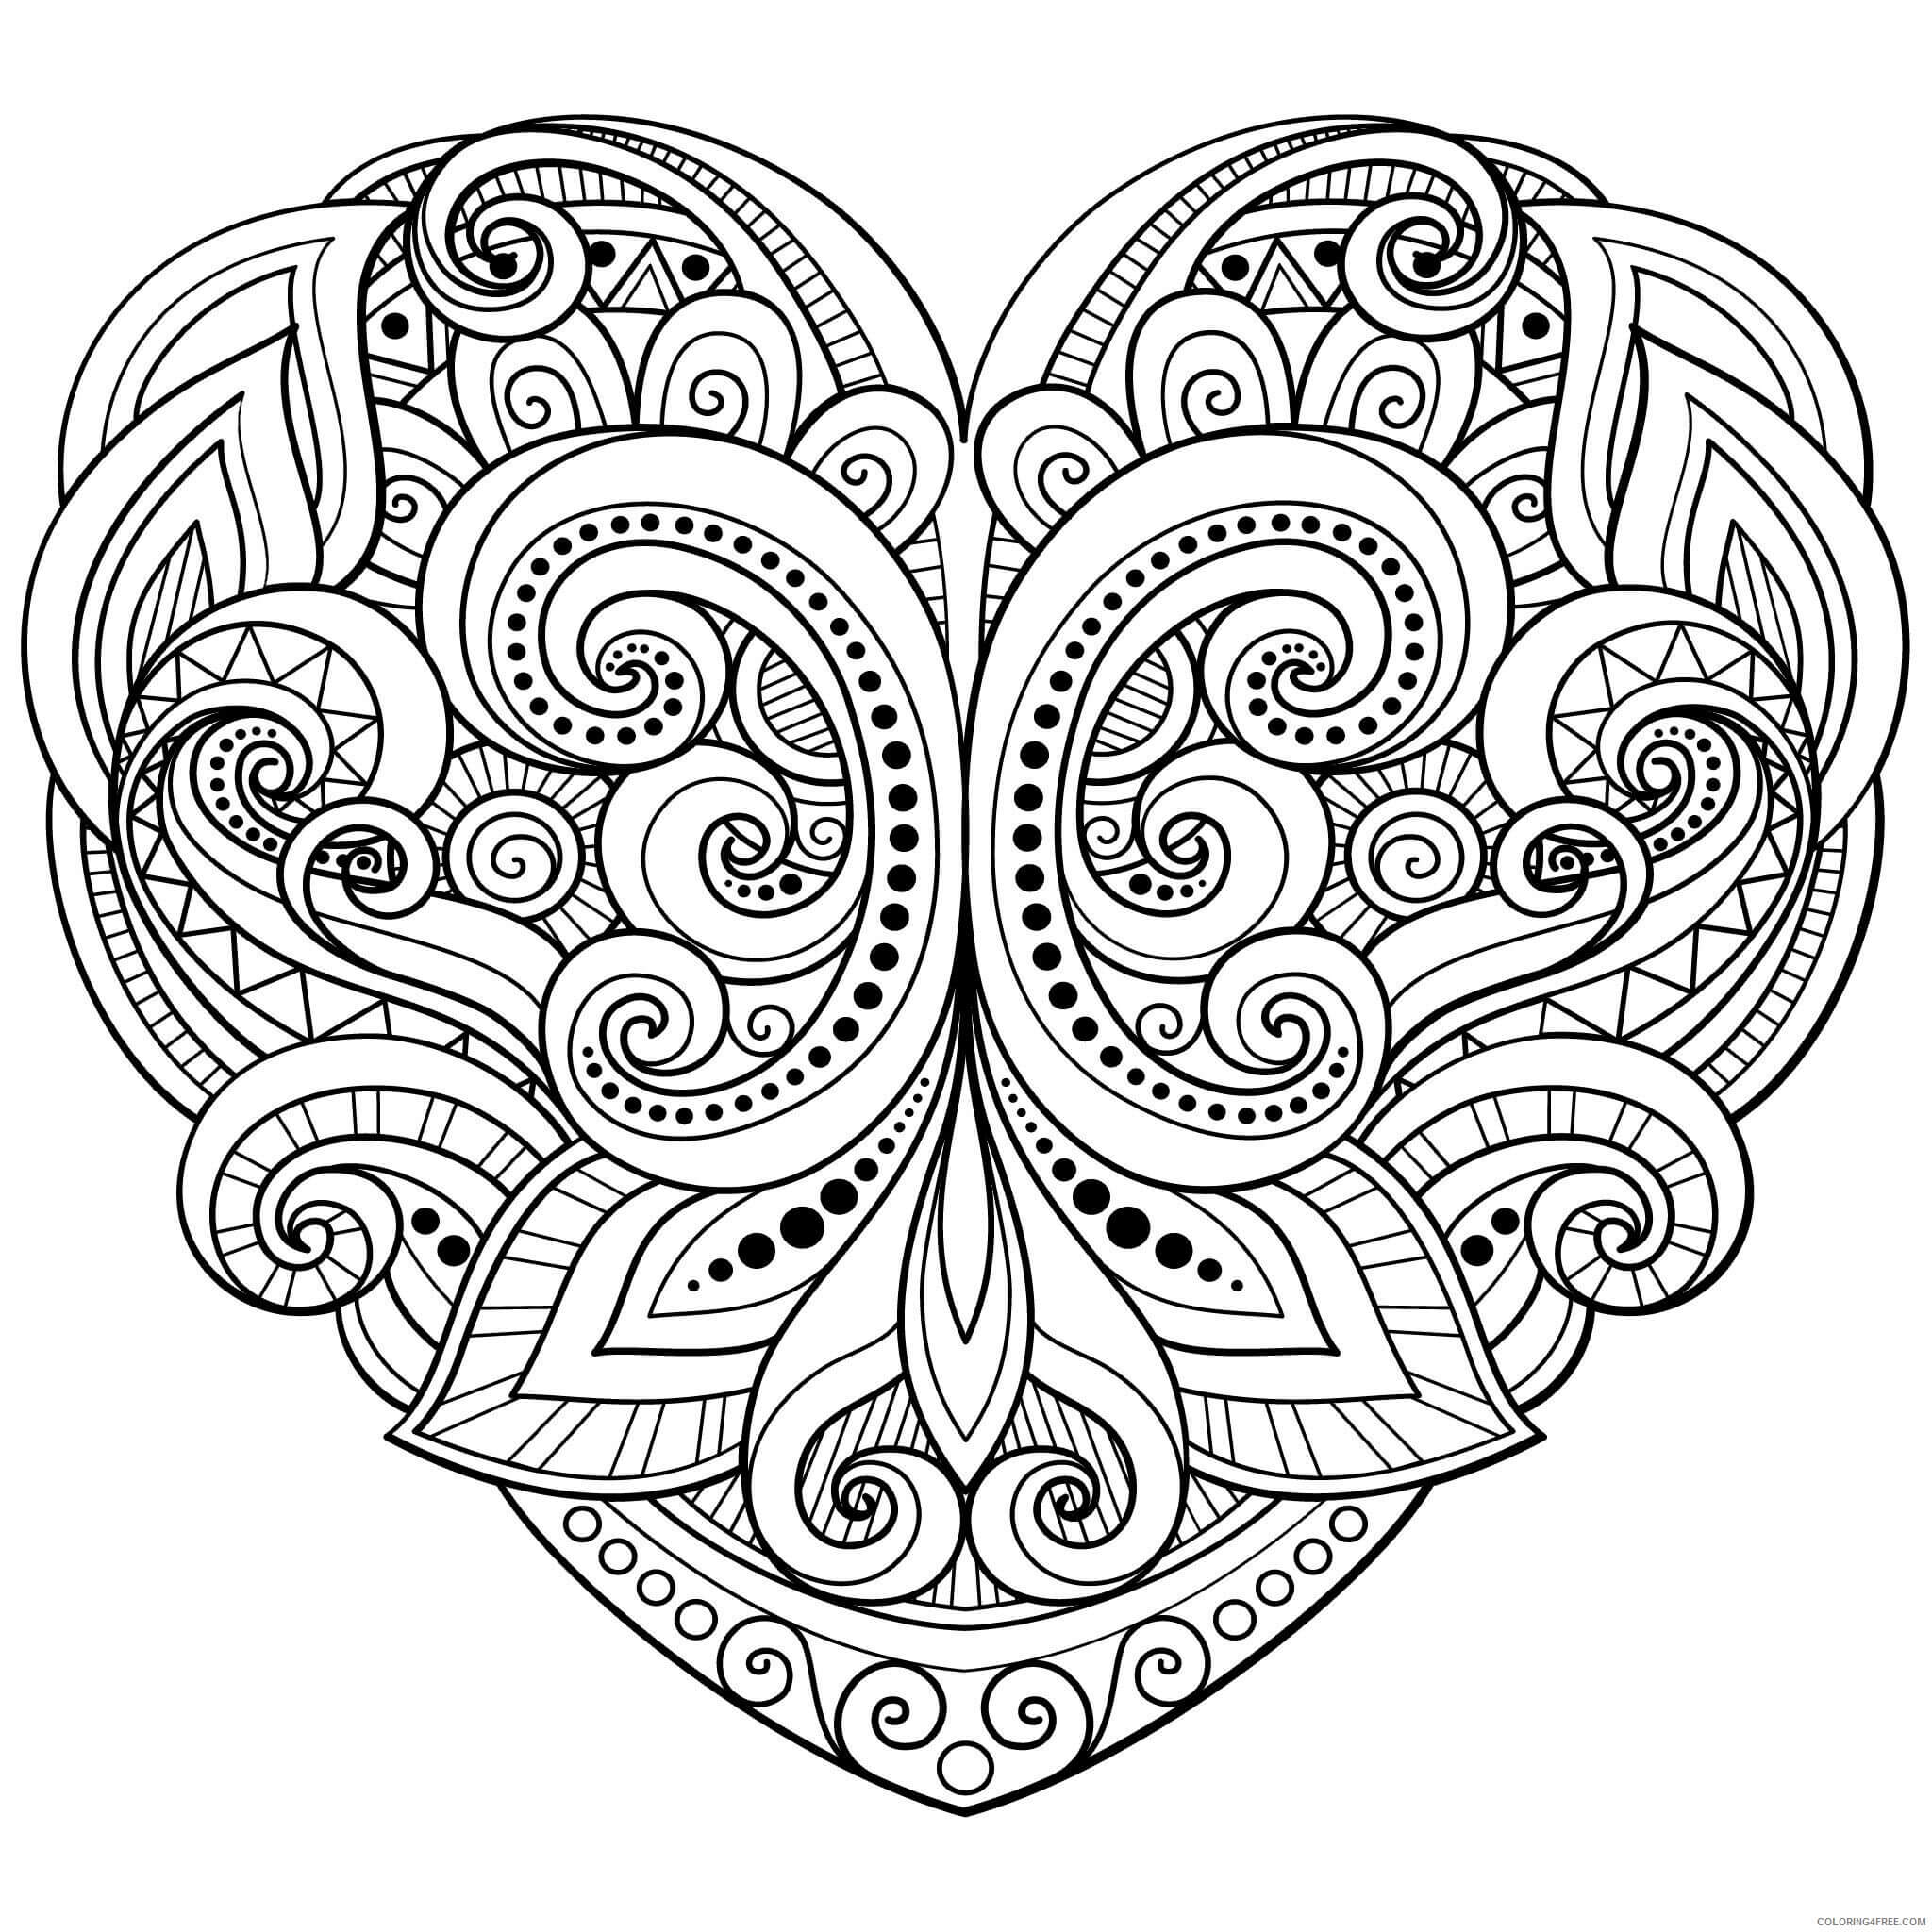 heart anatomy coloring pages for adults | coloring pages of hearts and flowers | love coloring pages for adults